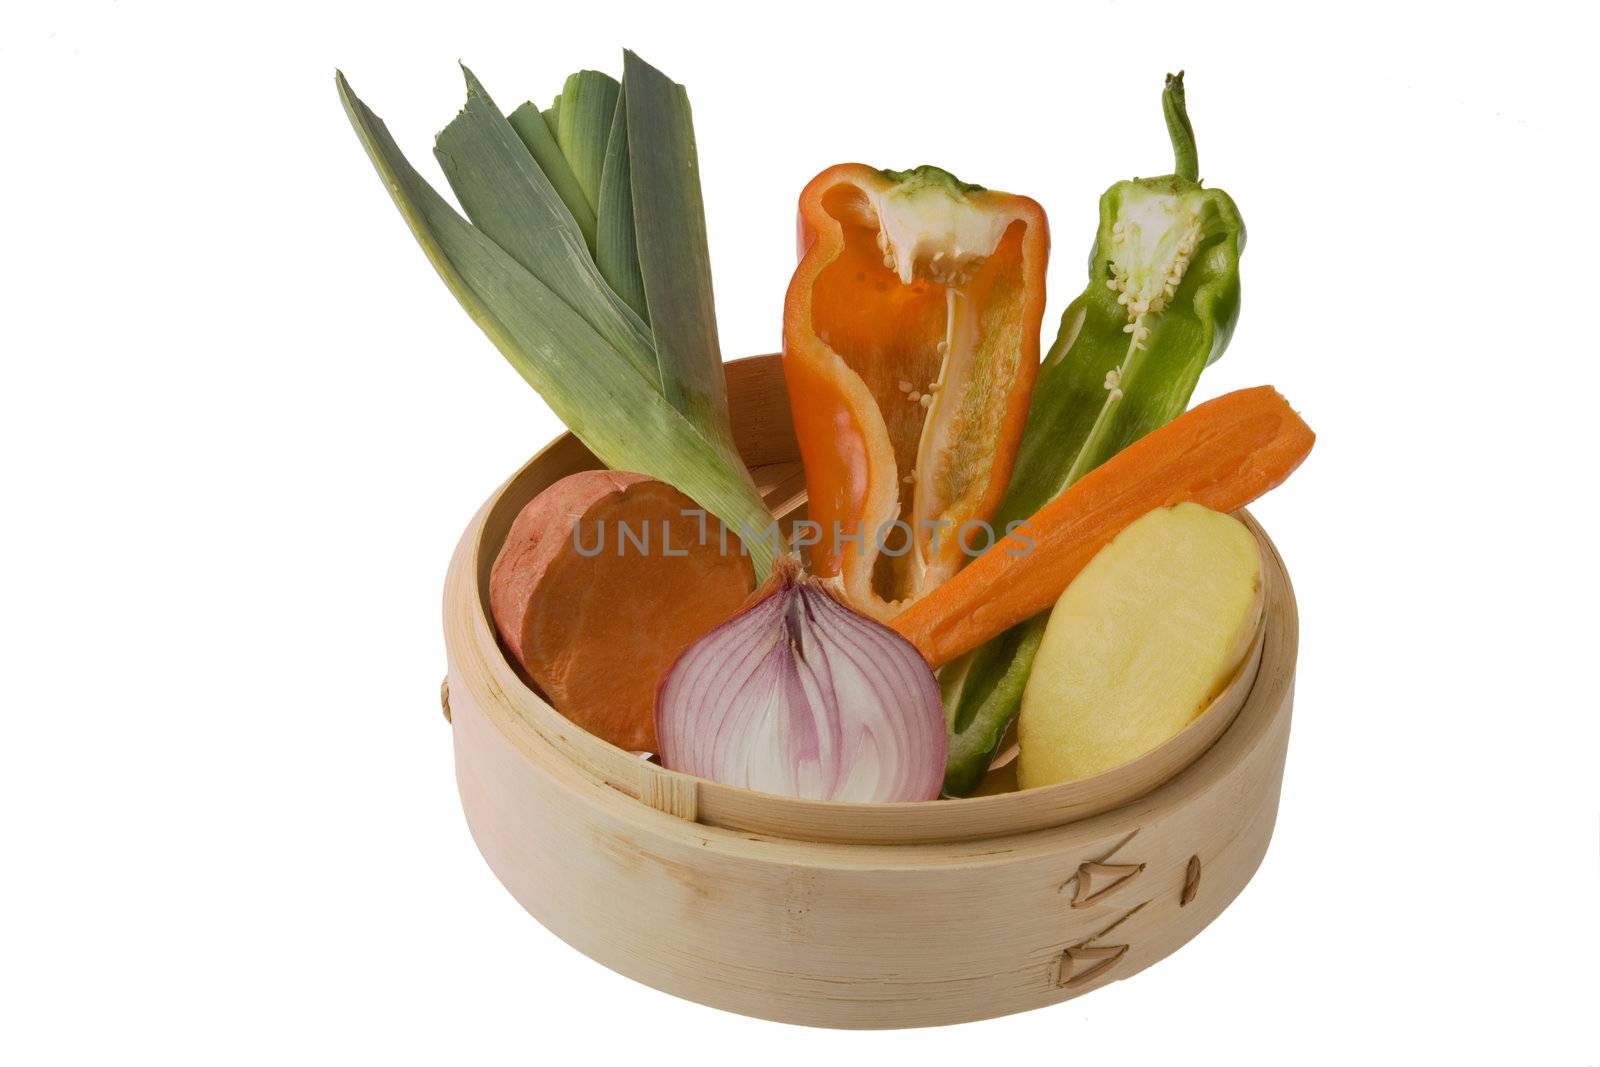 Pieces of  peppers, leeks, onion, carrot, potatoes and sweet potatoes in a bamboo steamer.